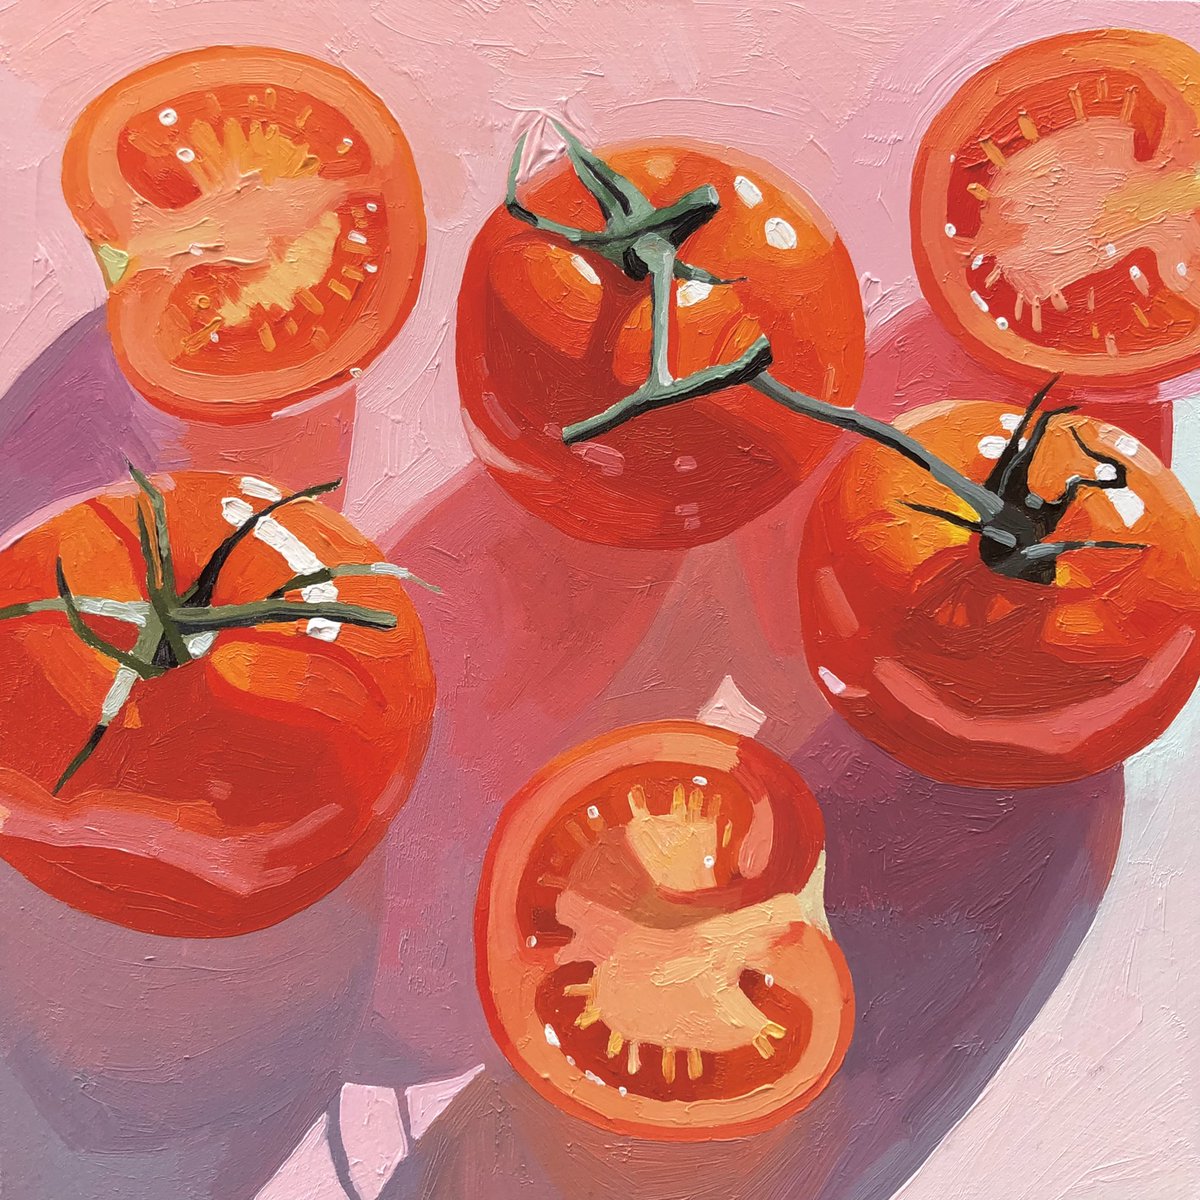 「not me painting the exact same tomatoes 」|Leah Gardnerのイラスト